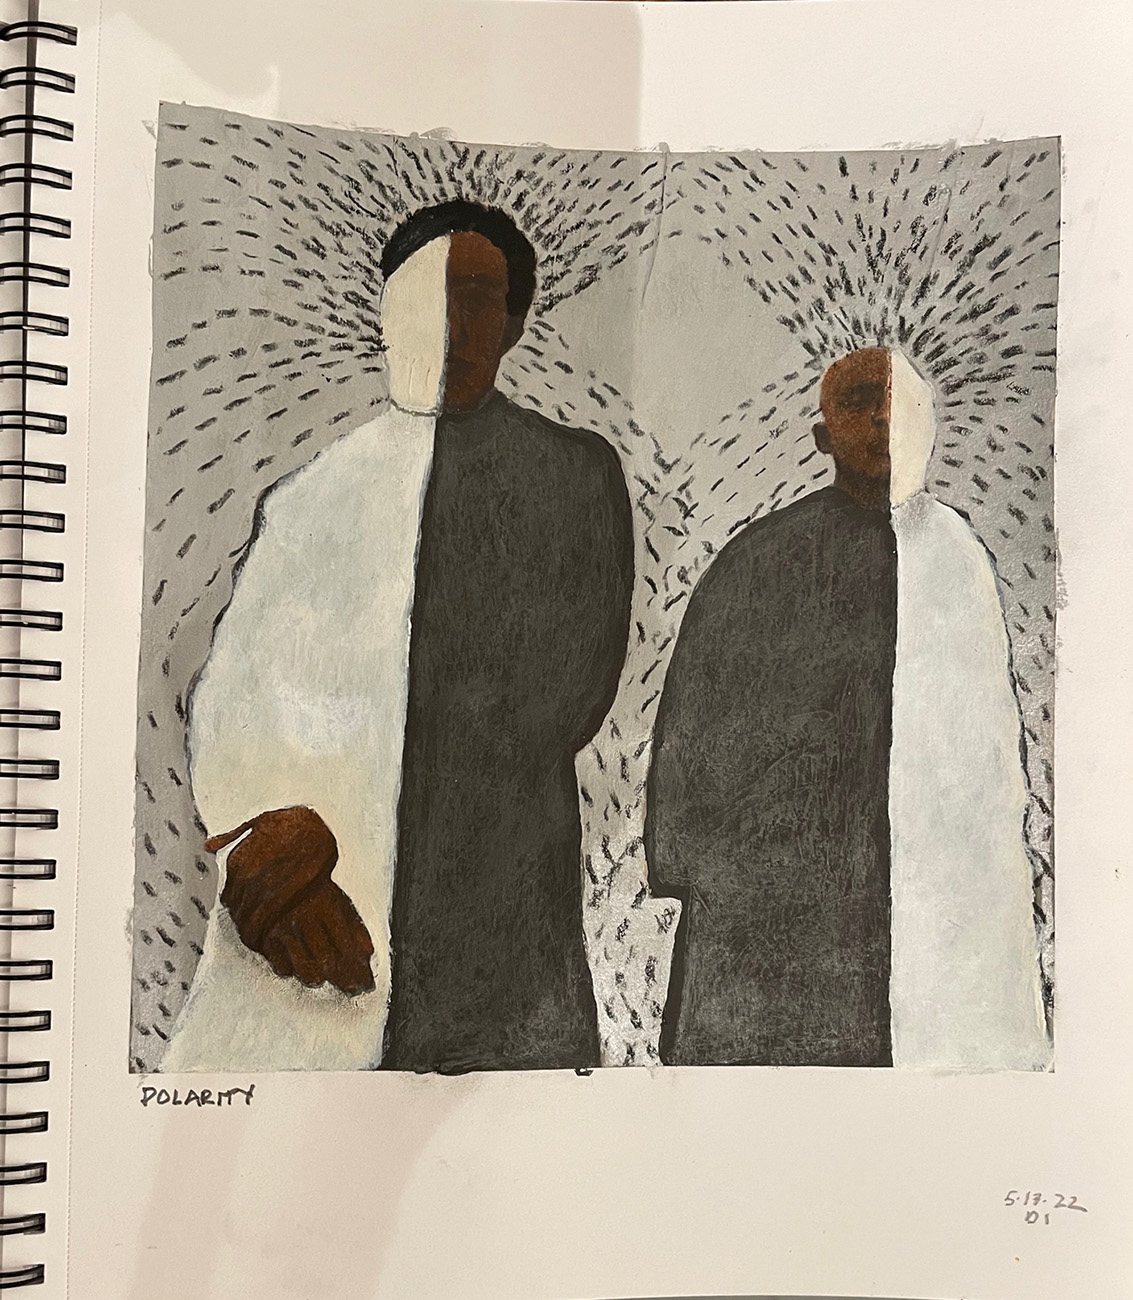 A drawing of two men

Description automatically generated